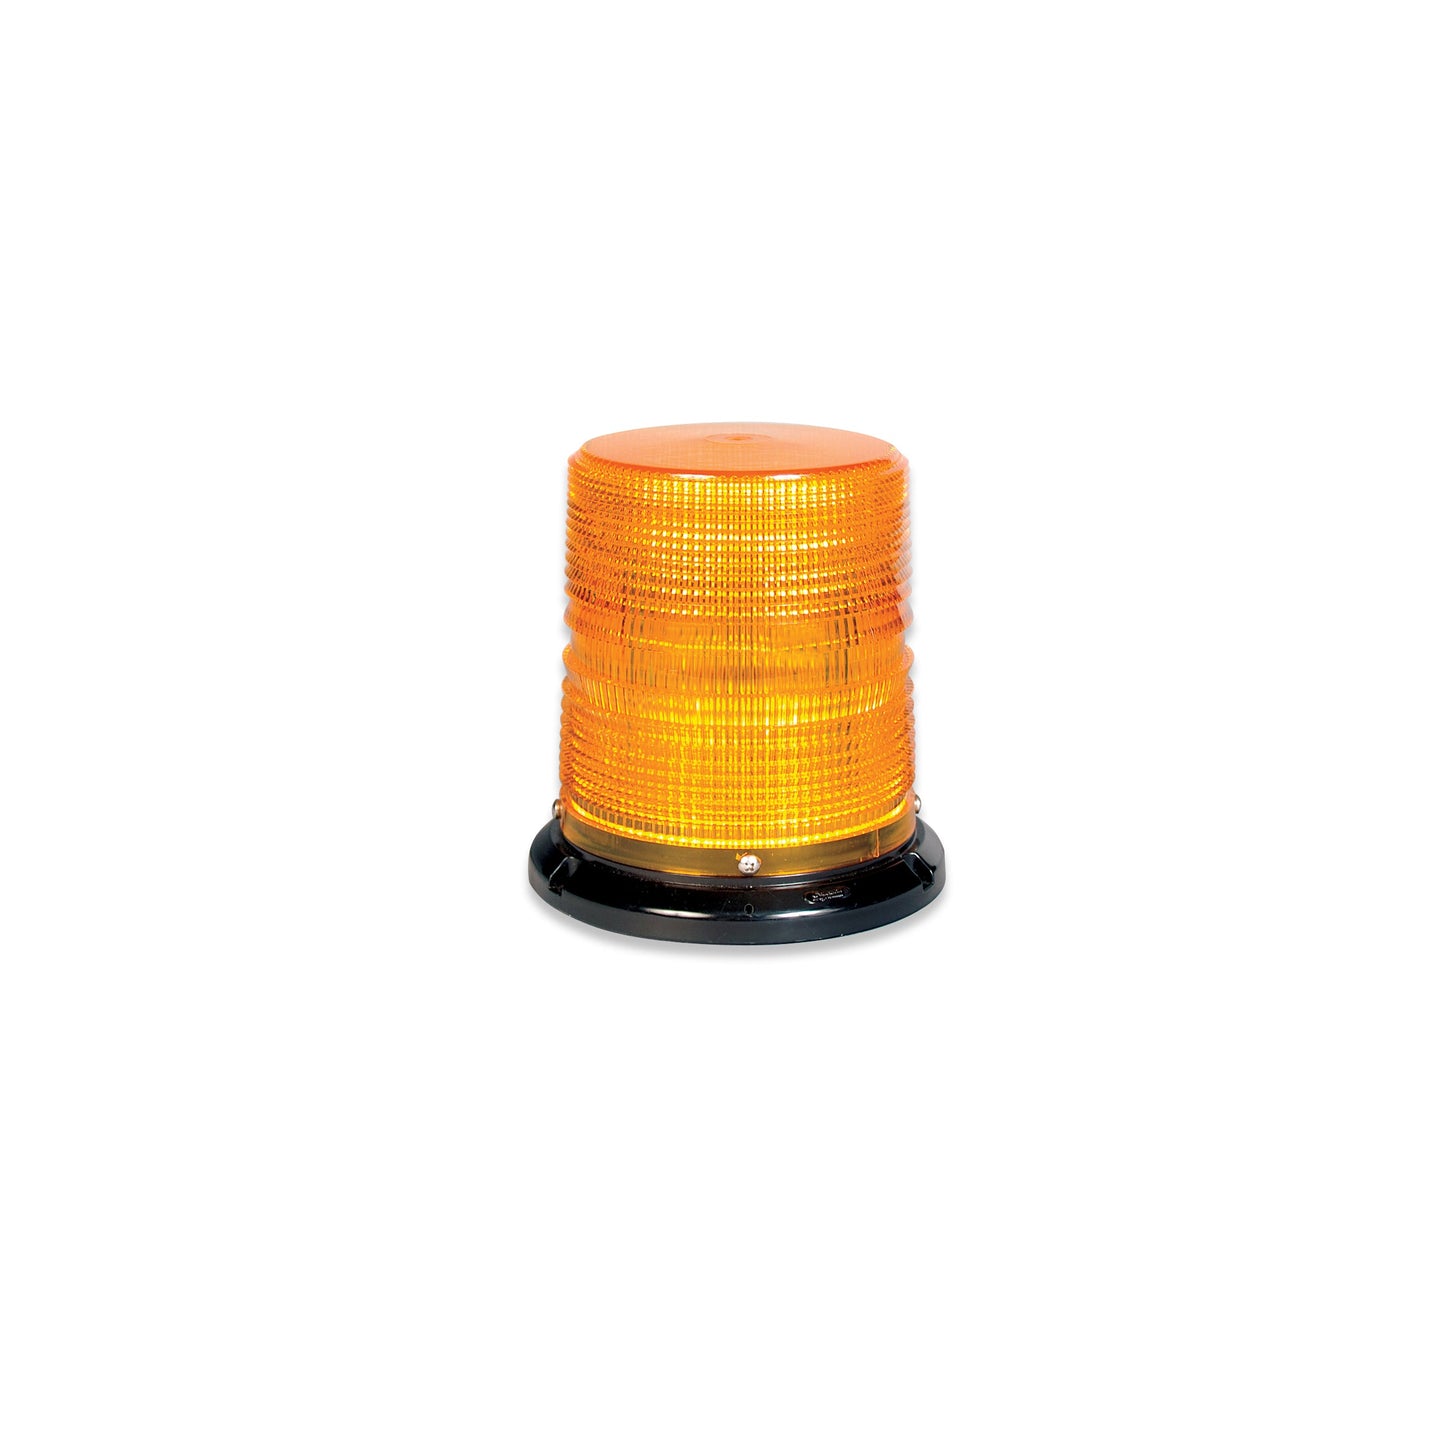 Soundoff Signal ELB45BCH0BC 4500 Series Led Beacon, 10-30V, Sae J845 Class 1 - Flat/Pipe Mount, 6" Clear Dome/ Blue Leds